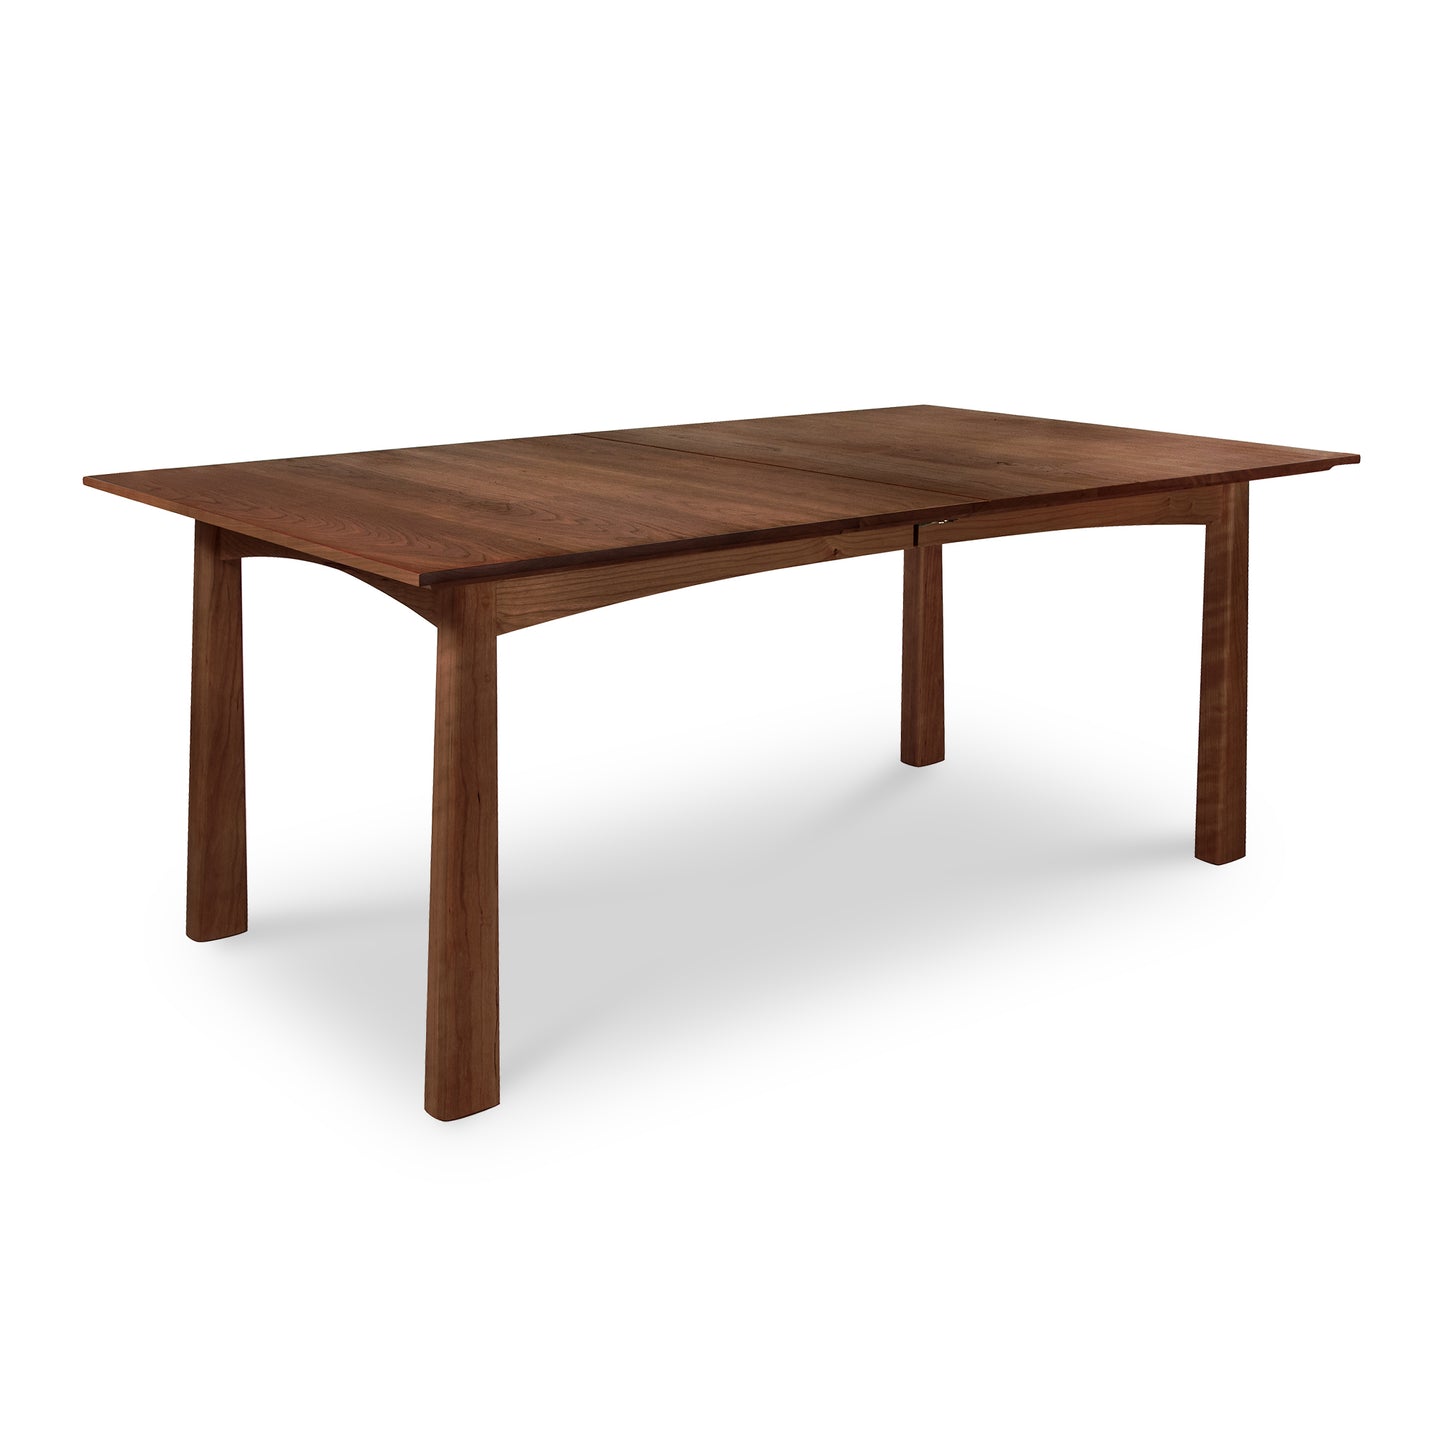 A Cherry Moon Extension Dining Table by Maple Corner Woodworks with a rectangular top and four legs, isolated on a white background.